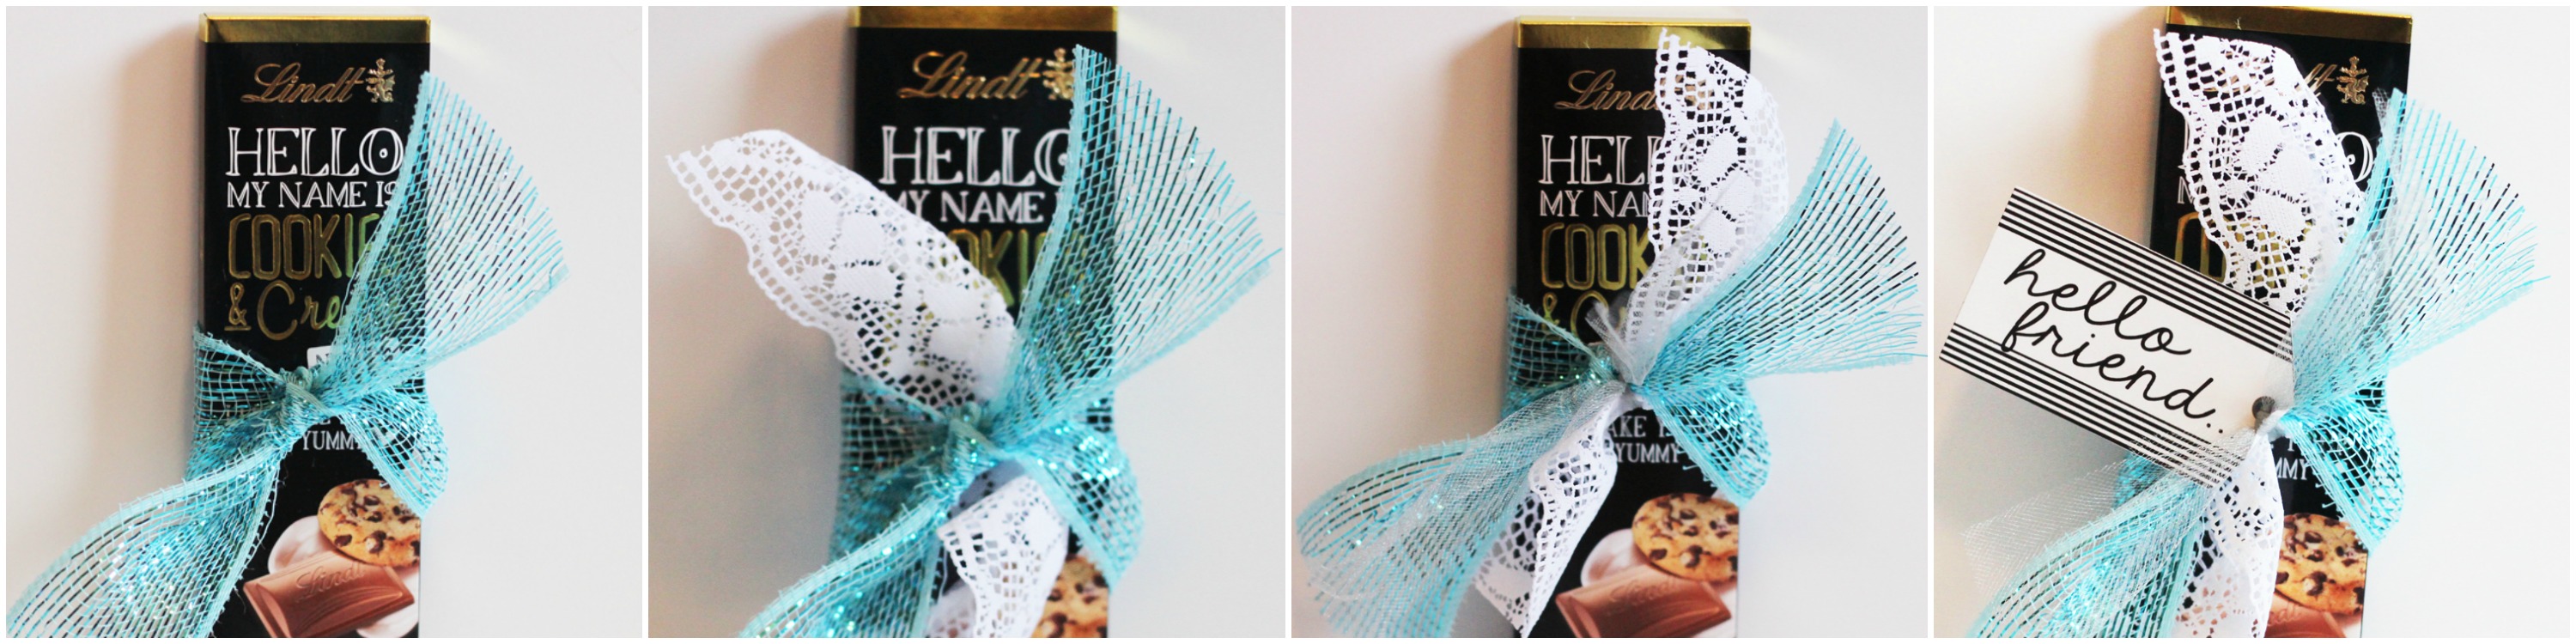 Lindt Hello Collage